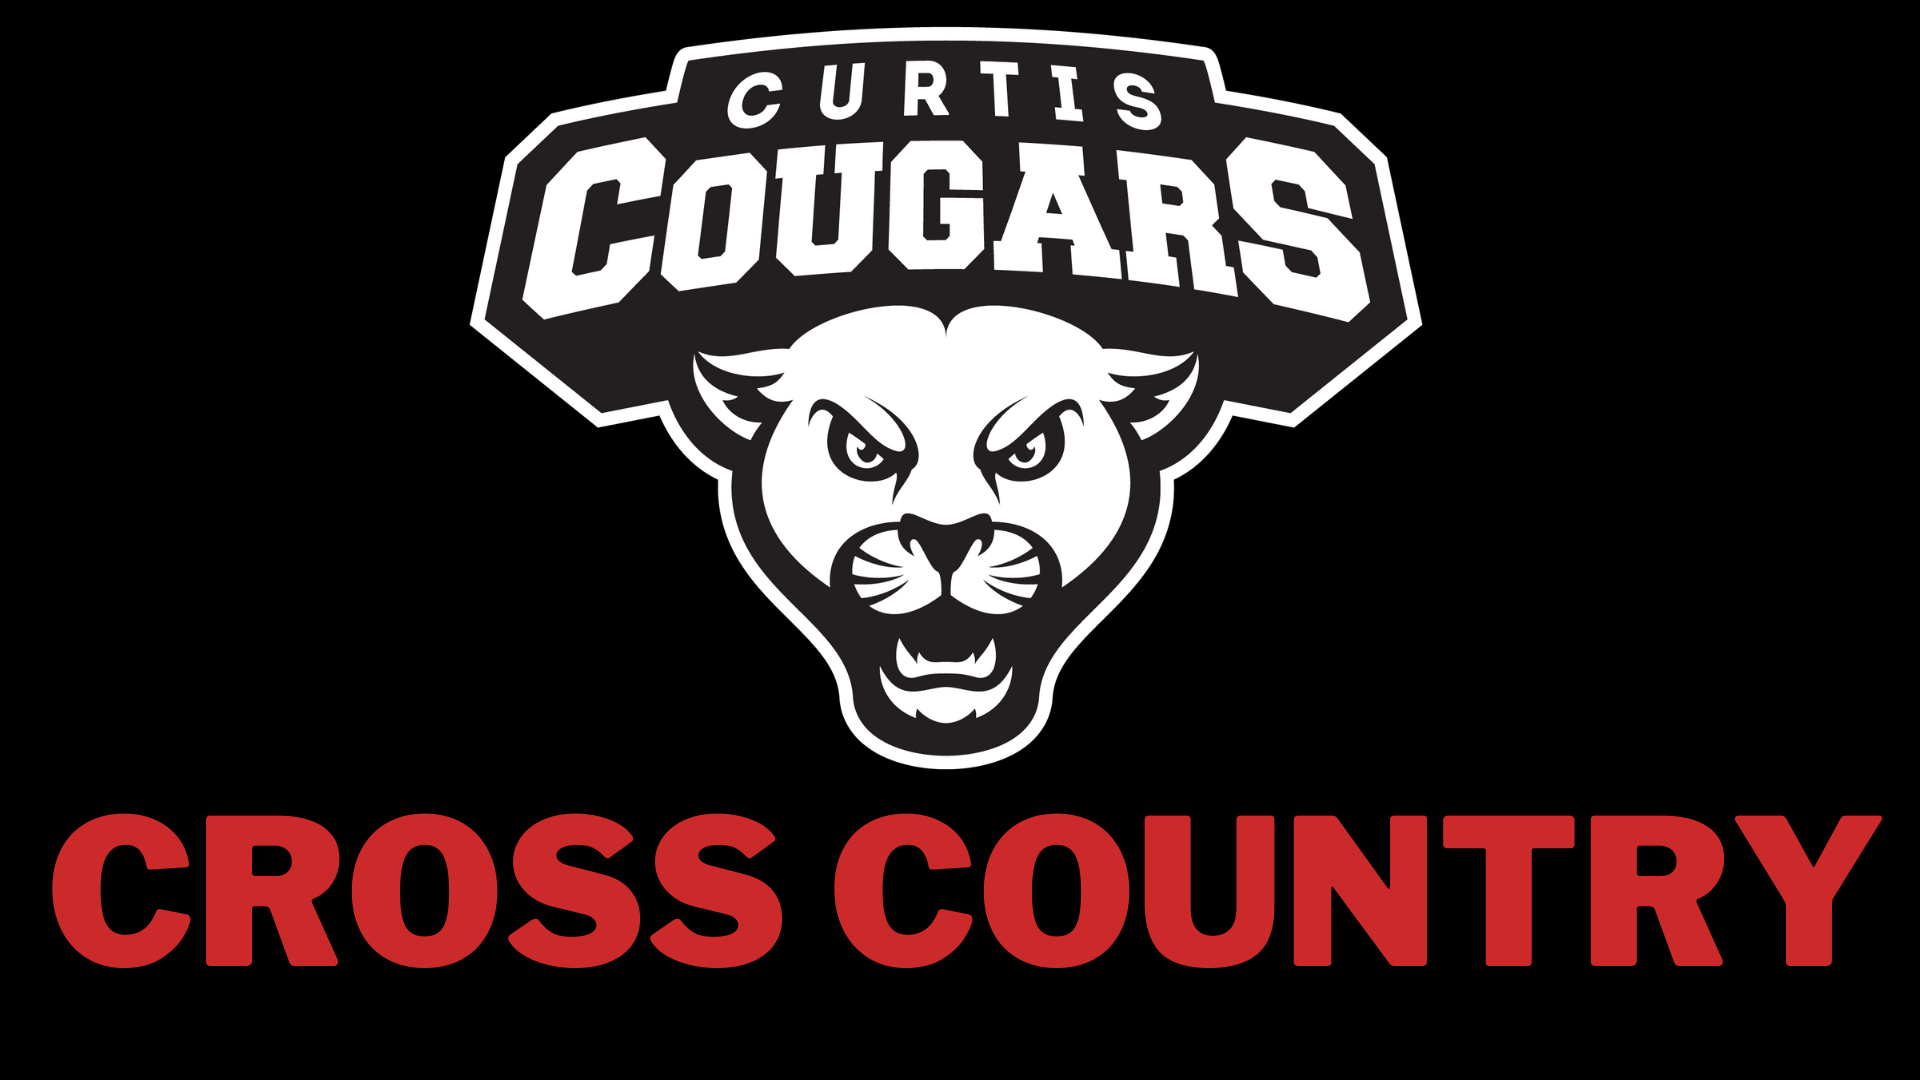 Curtis Cougars Cross Country